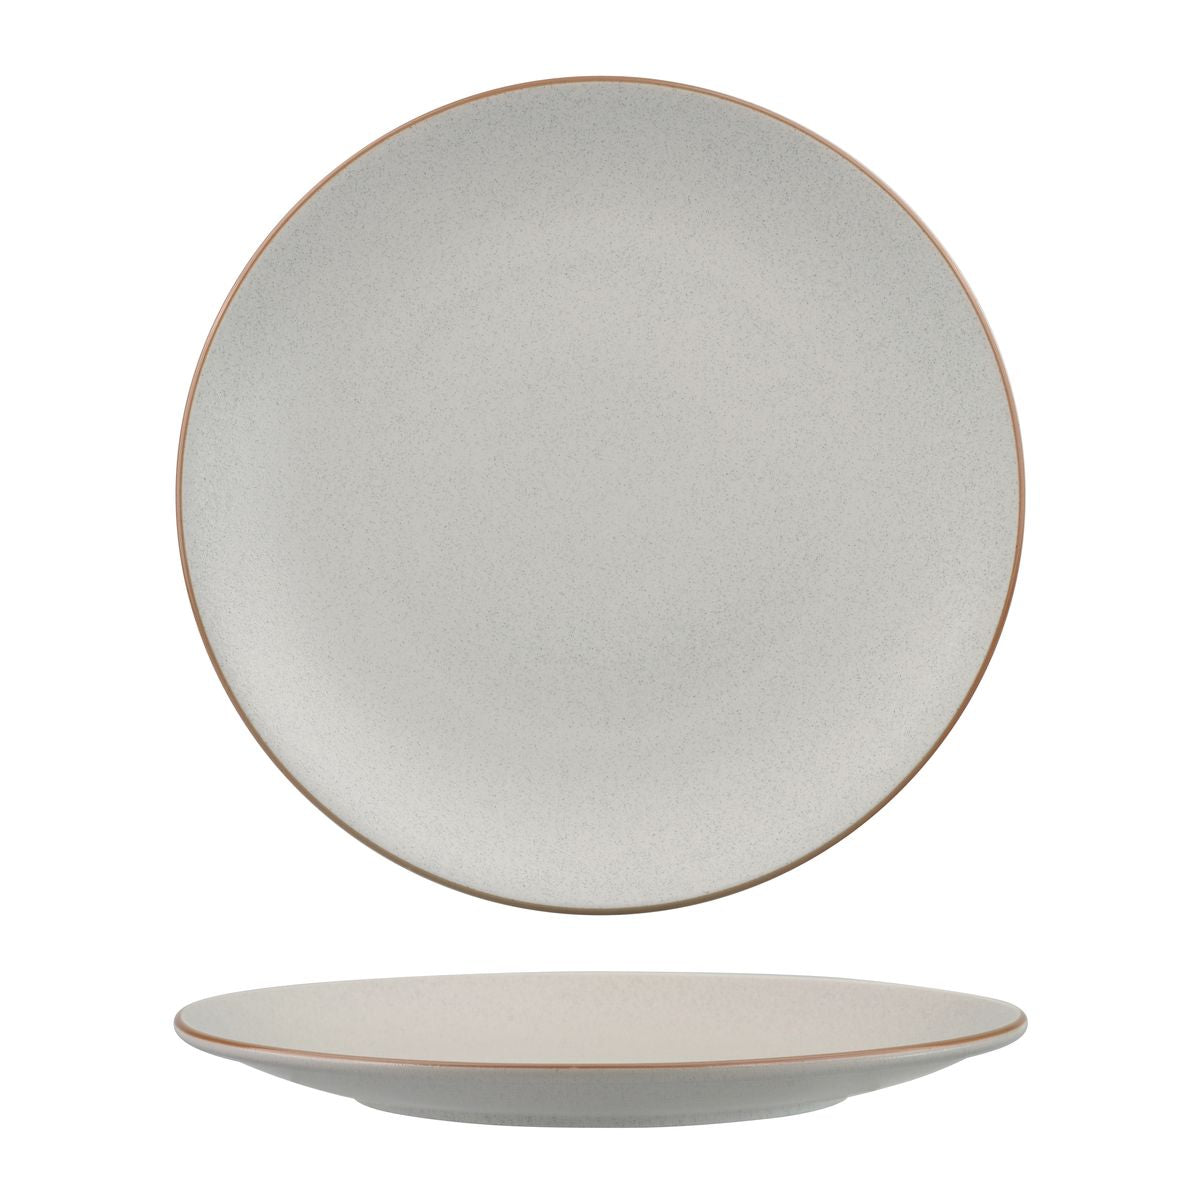 Round Coupe Plate - 285mm, Zuma Mineral from Zuma. Matt Finish, made out of Ceramic and sold in boxes of 3. Hospitality quality at wholesale price with The Flying Fork! 